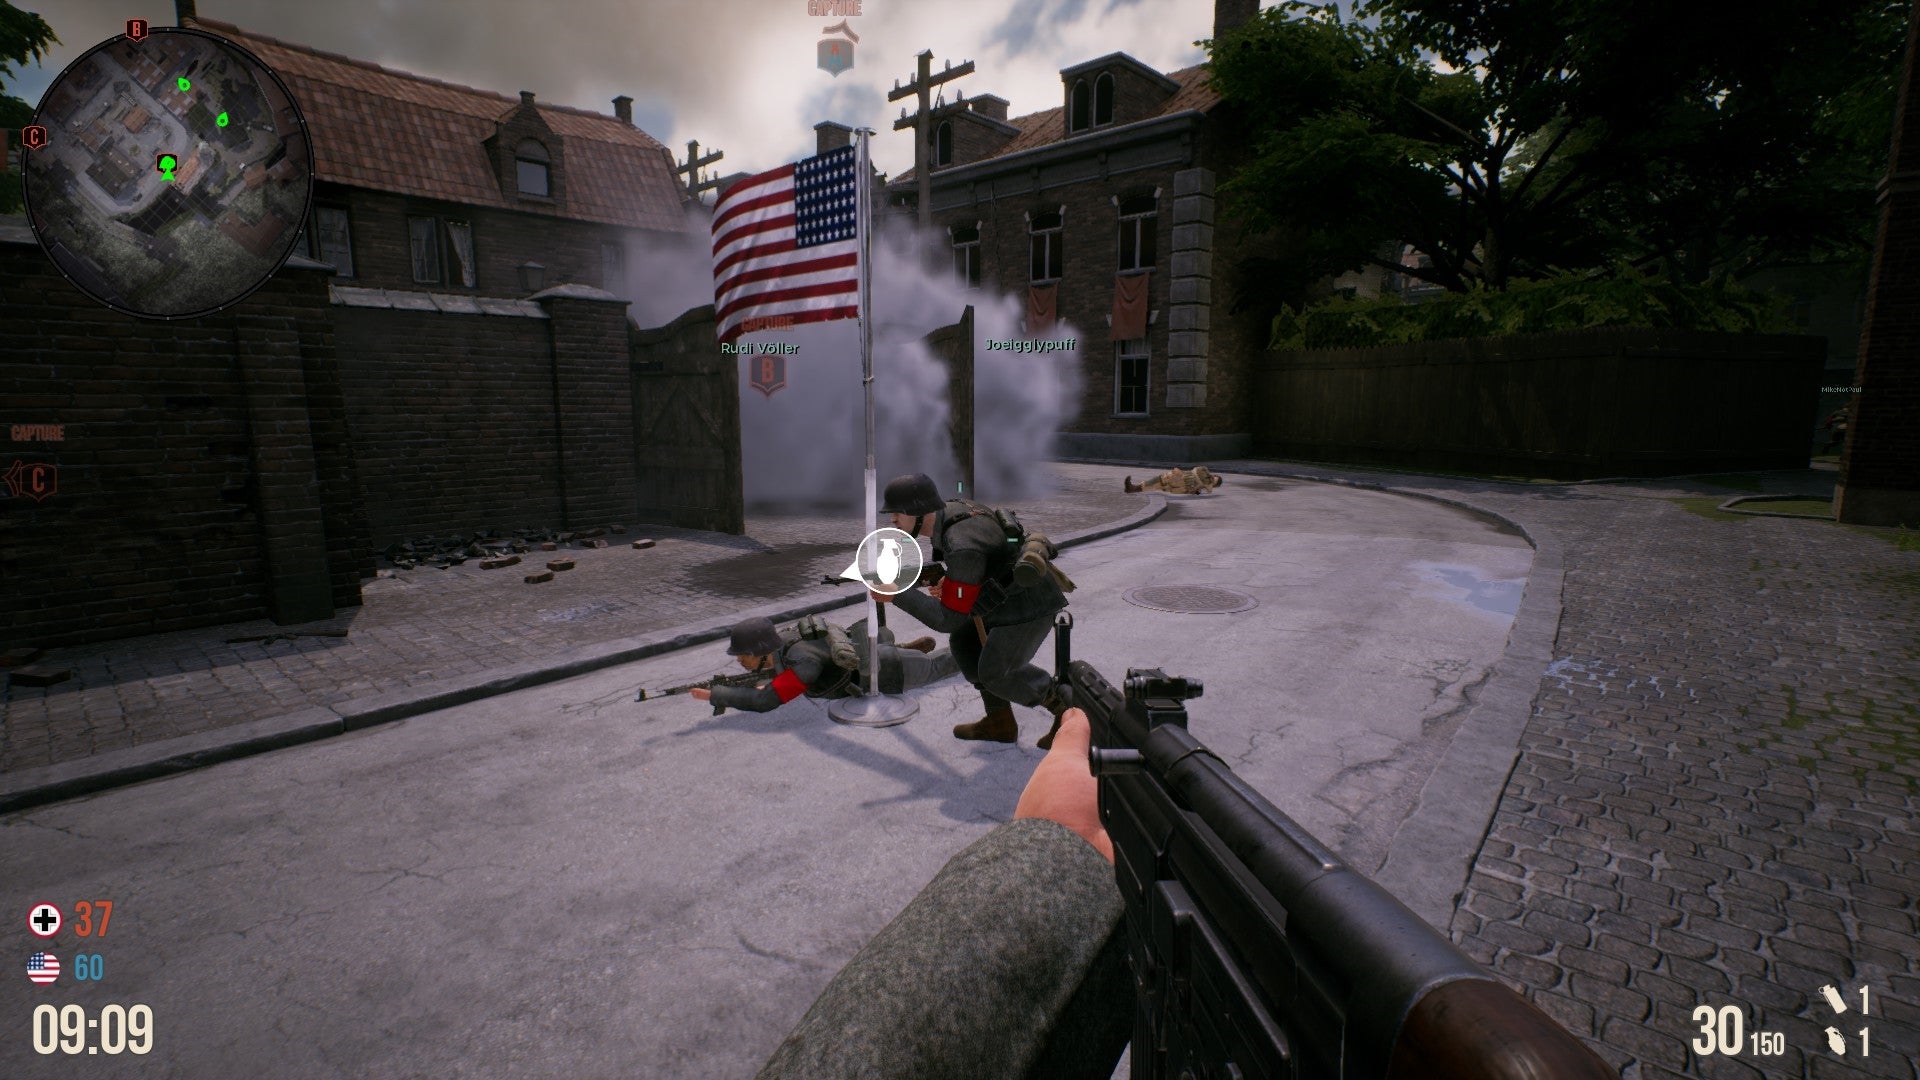 Screenshot of Battalion 1944 gameplay showing soldiers and flag capture.